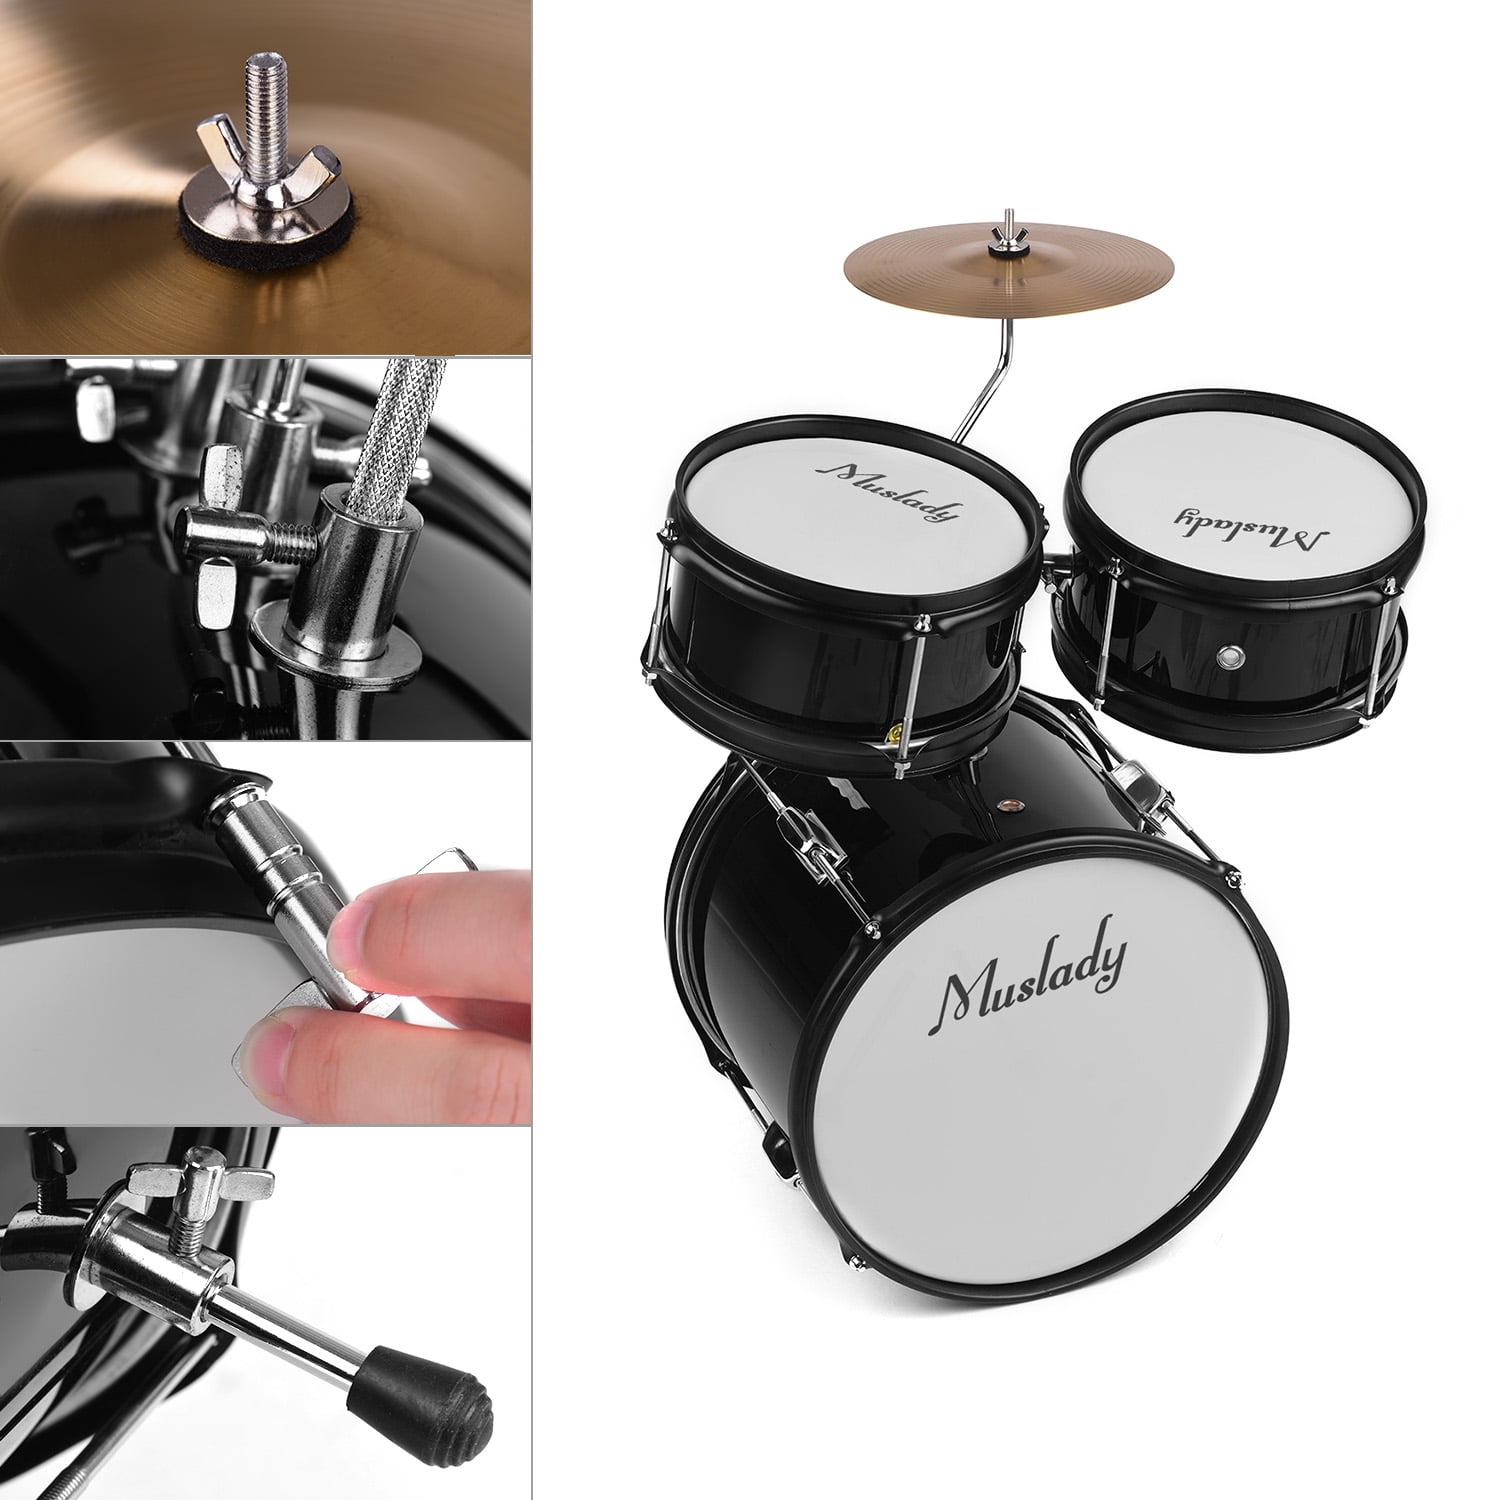 Muslady Beginners Drum Set 3-Piece with Throne Cymbal Pedal & Drumsticks - Walmart.com